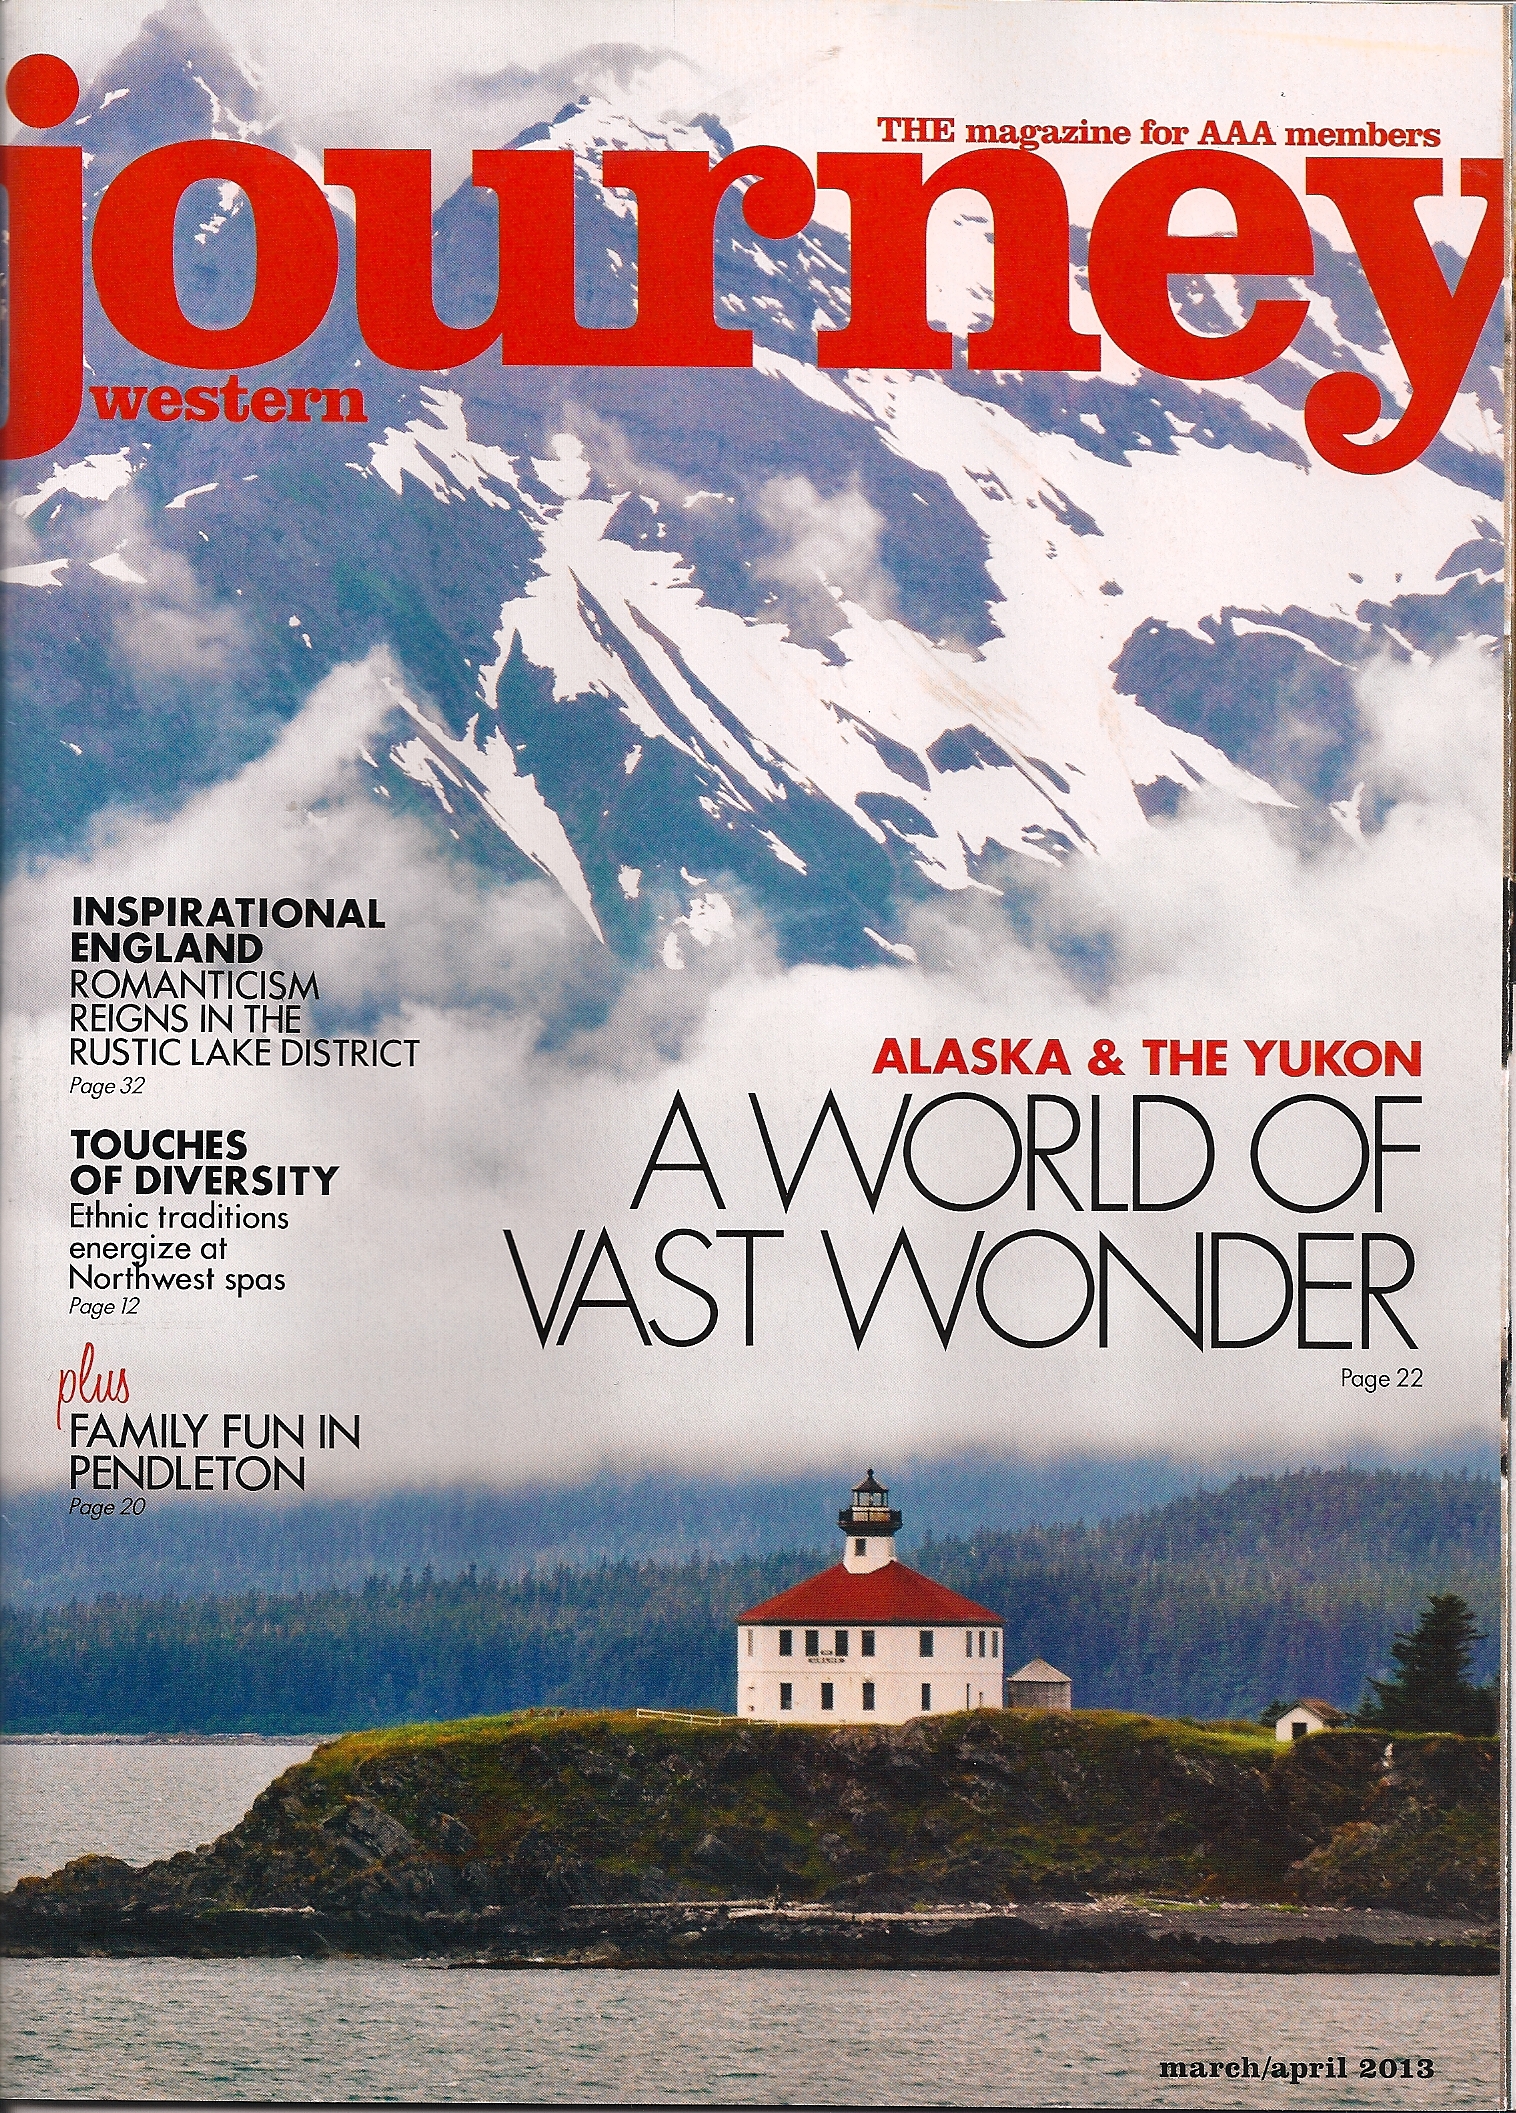 Journey Magazine (USA) April 2013 cover photo and article